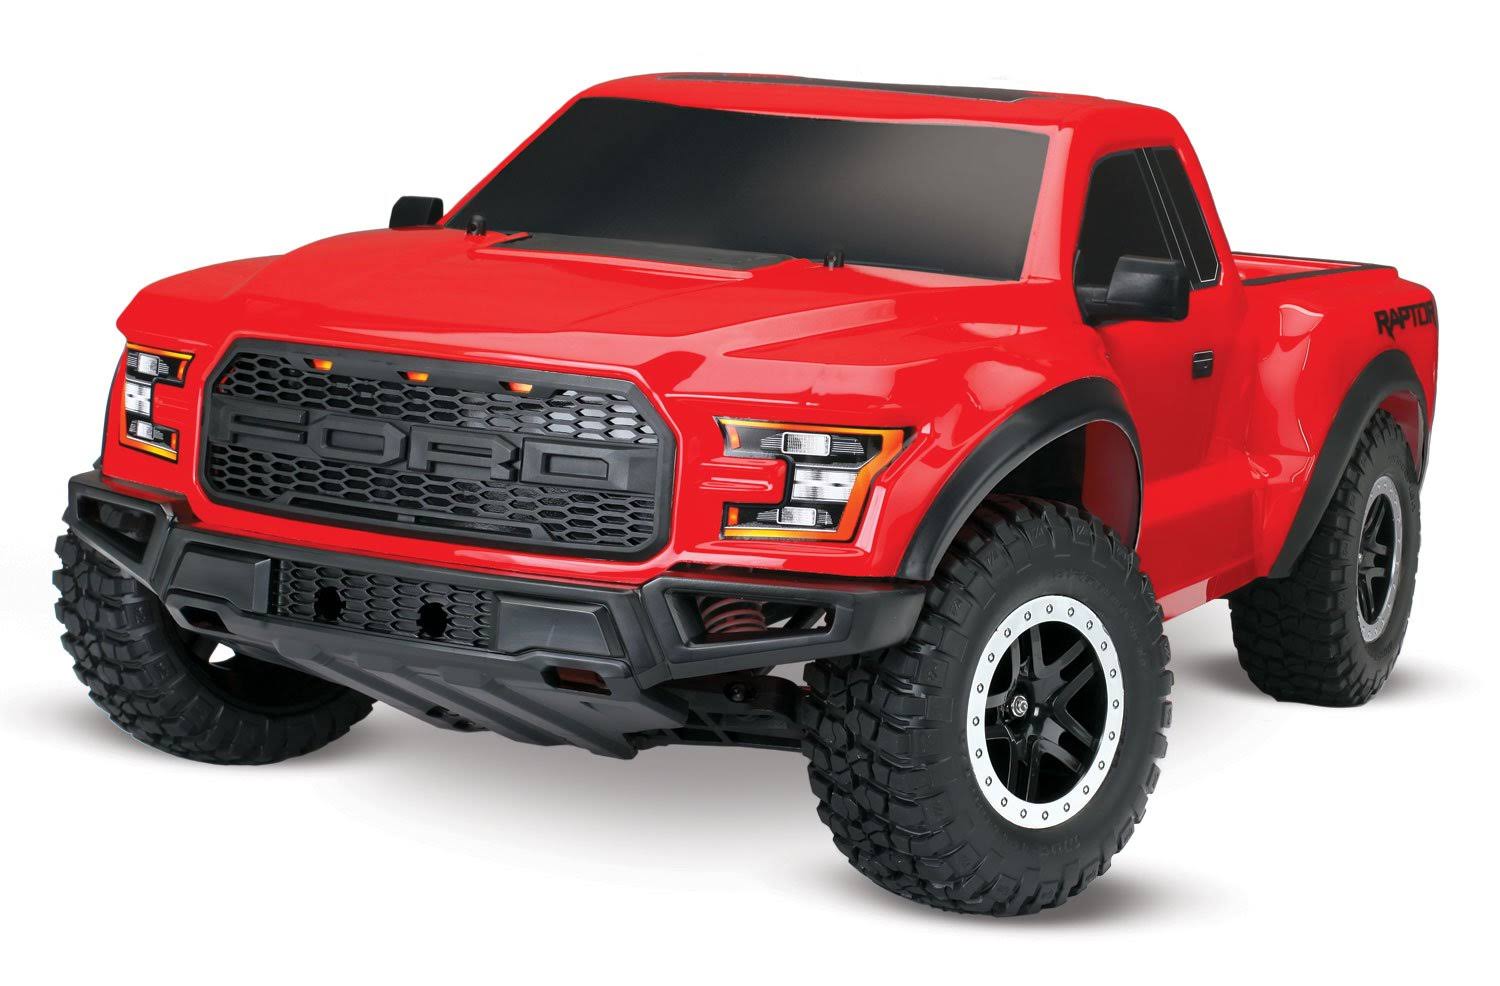 Traxxas 580941t5 Ford Raptor RC Model Vehicle Kit - Red, 1:10 Scale